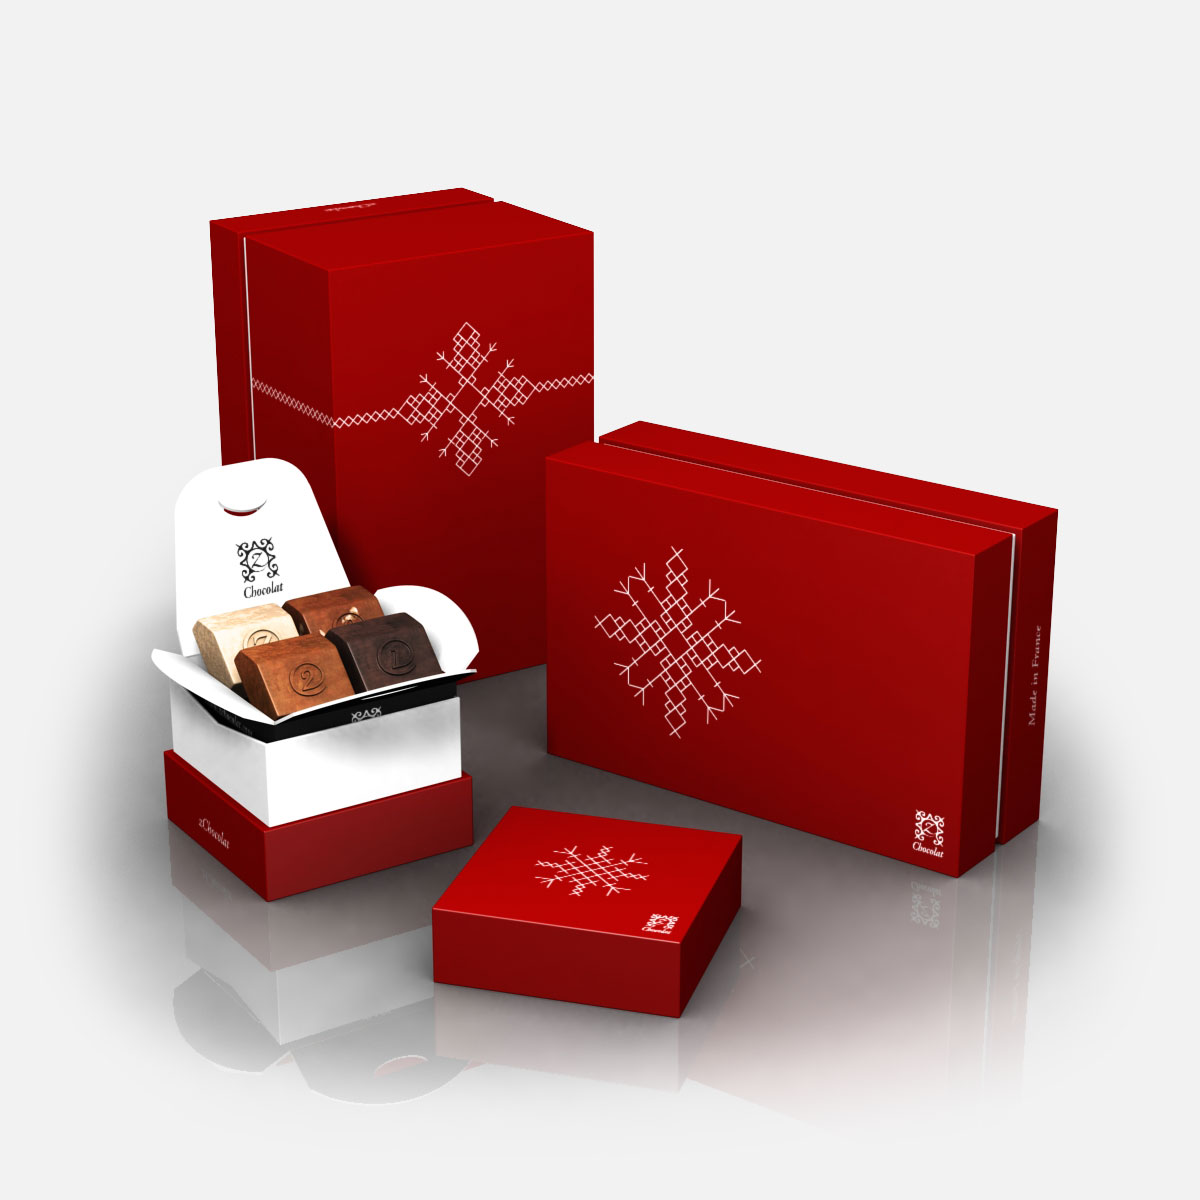 zBox Holiday Collection: “Chic & modern”